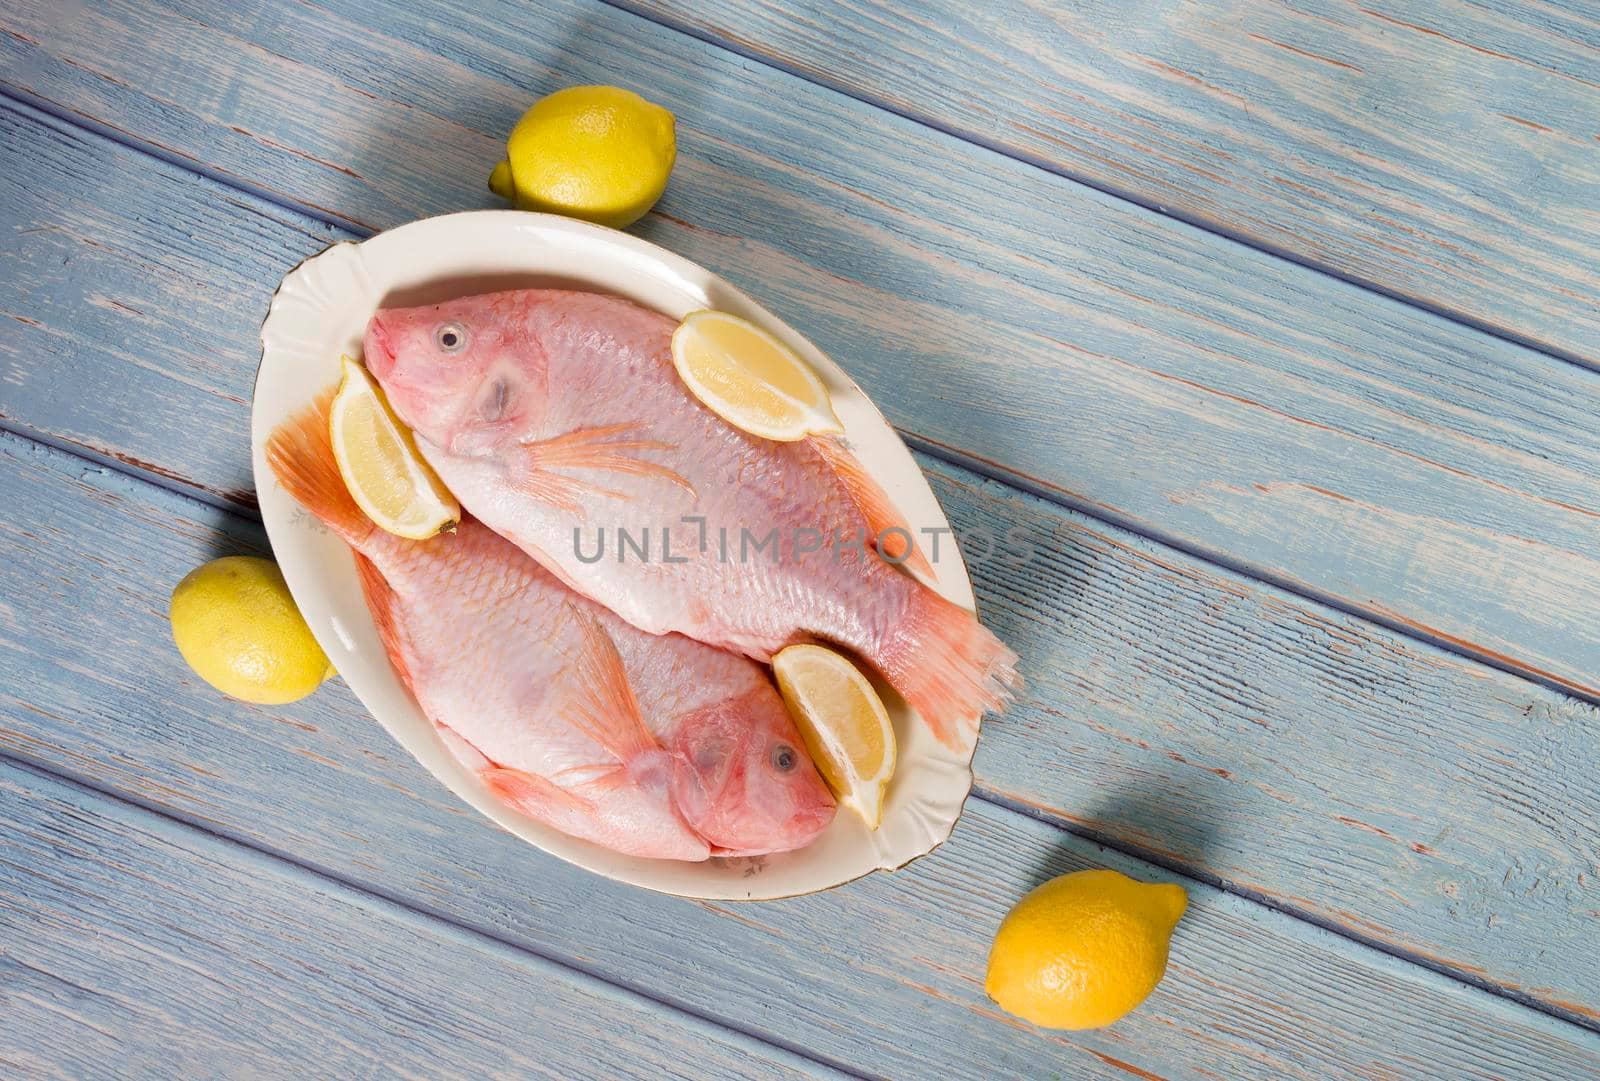 raw fresh pink tilapia fish lies on a platter surrounded by yellow lemons and on a blue wooden background. High quality photo